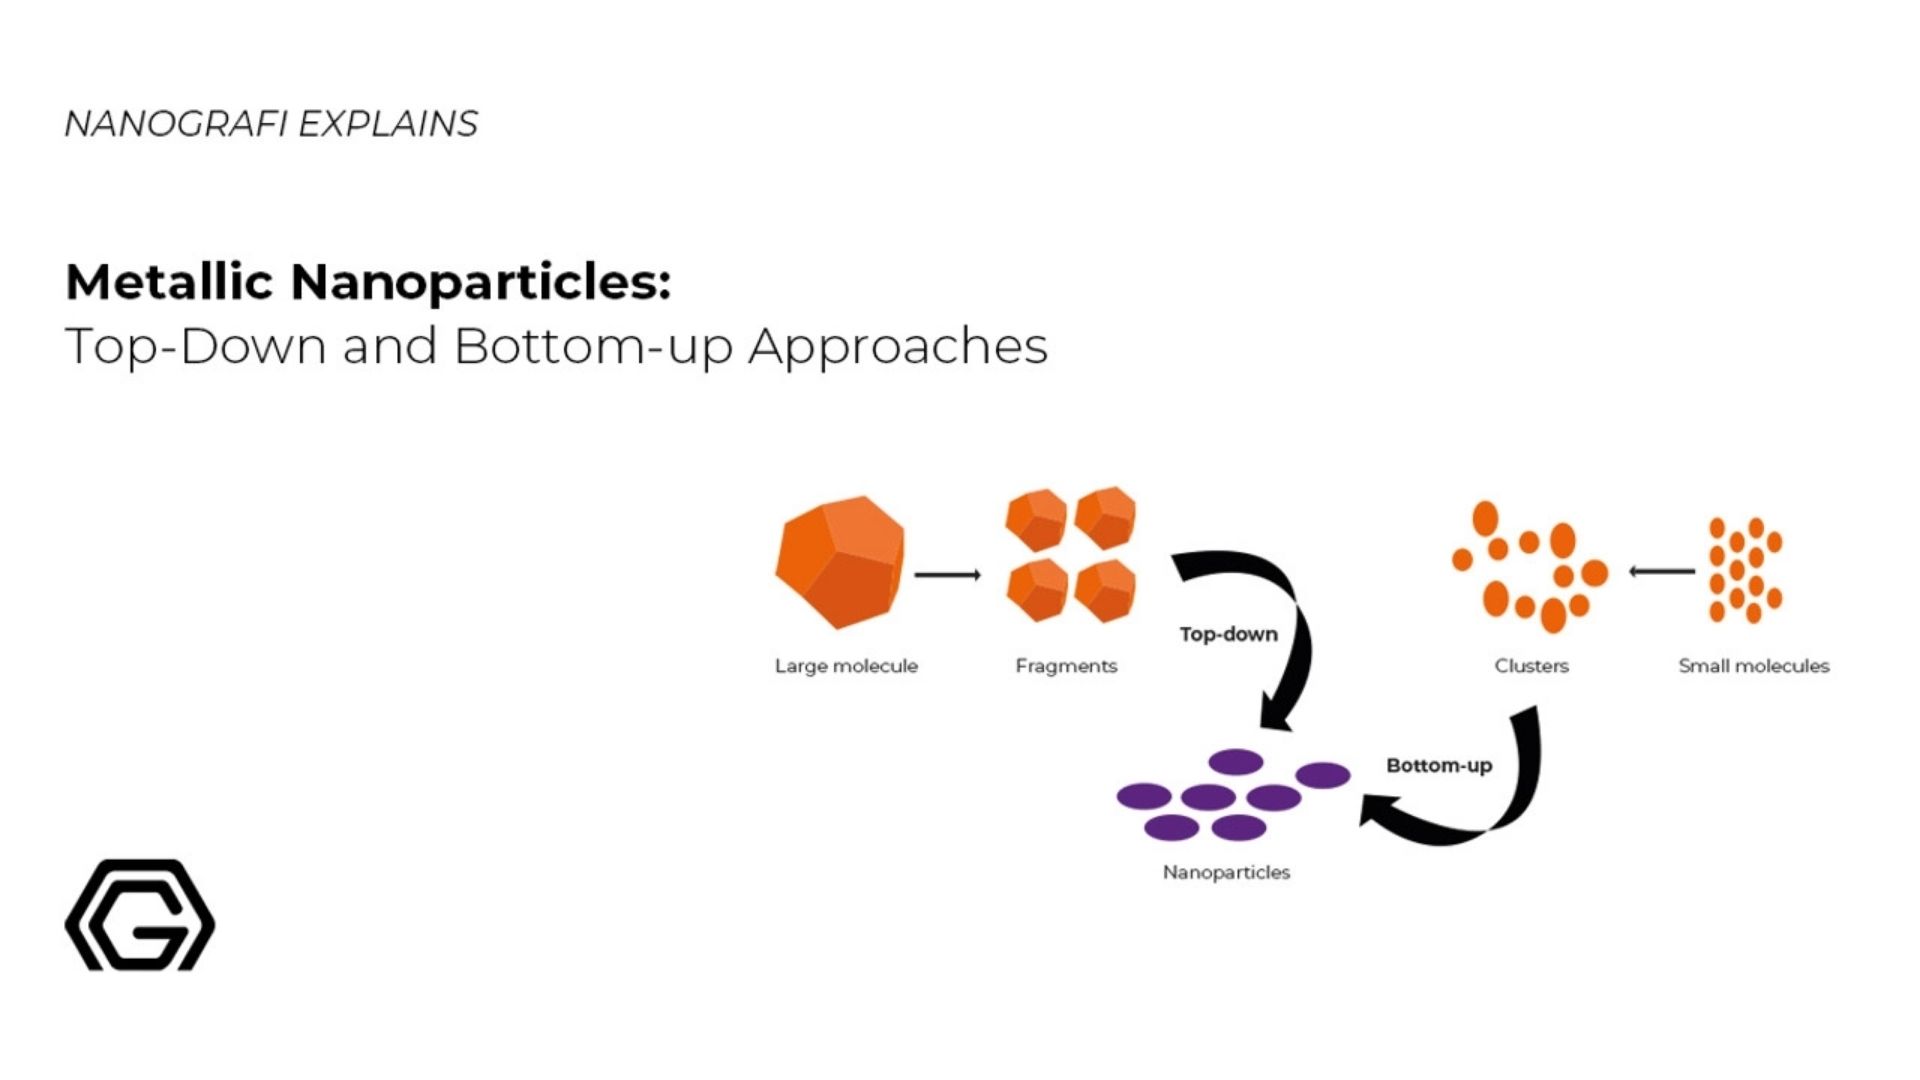 Metallic Nanoparticles: Top down and bottom-up approaches